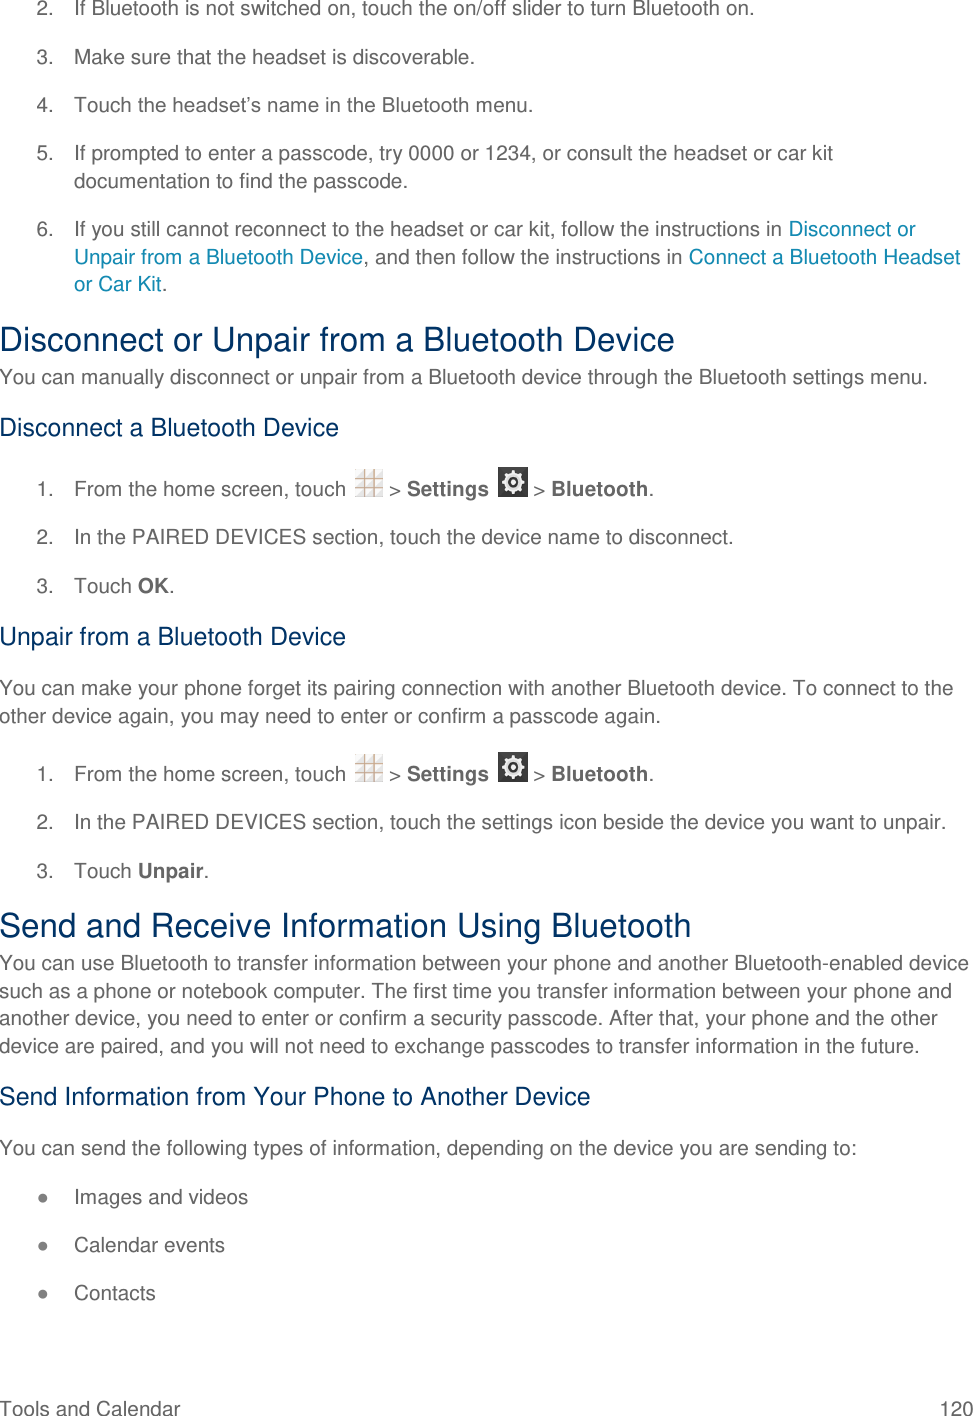 Tools and Calendar  120 2.  If Bluetooth is not switched on, touch the on/off slider to turn Bluetooth on. 3.  Make sure that the headset is discoverable. 4.  Touch the headset’s name in the Bluetooth menu. 5.  If prompted to enter a passcode, try 0000 or 1234, or consult the headset or car kit documentation to find the passcode. 6.  If you still cannot reconnect to the headset or car kit, follow the instructions in Disconnect or Unpair from a Bluetooth Device, and then follow the instructions in Connect a Bluetooth Headset or Car Kit. Disconnect or Unpair from a Bluetooth Device You can manually disconnect or unpair from a Bluetooth device through the Bluetooth settings menu. Disconnect a Bluetooth Device 1.  From the home screen, touch   &gt; Settings   &gt; Bluetooth. 2.  In the PAIRED DEVICES section, touch the device name to disconnect. 3.  Touch OK. Unpair from a Bluetooth Device You can make your phone forget its pairing connection with another Bluetooth device. To connect to the other device again, you may need to enter or confirm a passcode again. 1.  From the home screen, touch   &gt; Settings   &gt; Bluetooth. 2.  In the PAIRED DEVICES section, touch the settings icon beside the device you want to unpair. 3.  Touch Unpair. Send and Receive Information Using Bluetooth You can use Bluetooth to transfer information between your phone and another Bluetooth-enabled device such as a phone or notebook computer. The first time you transfer information between your phone and another device, you need to enter or confirm a security passcode. After that, your phone and the other device are paired, and you will not need to exchange passcodes to transfer information in the future. Send Information from Your Phone to Another Device You can send the following types of information, depending on the device you are sending to: ● Images and videos ● Calendar events ● Contacts 